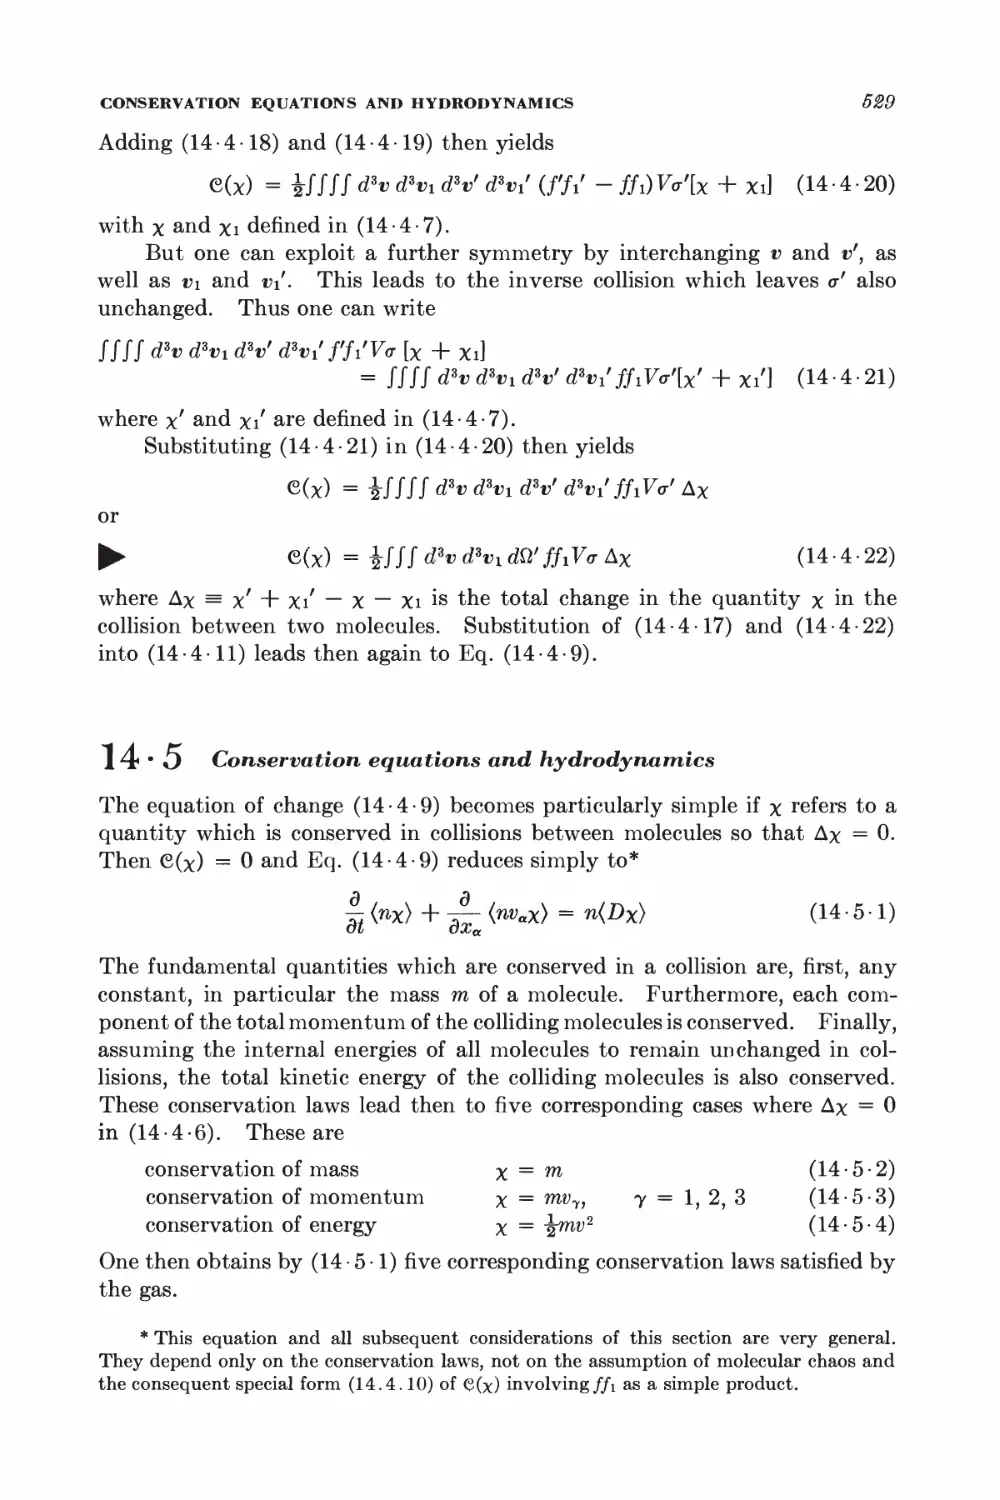 14.5 Conservation equations and hydrodynamics